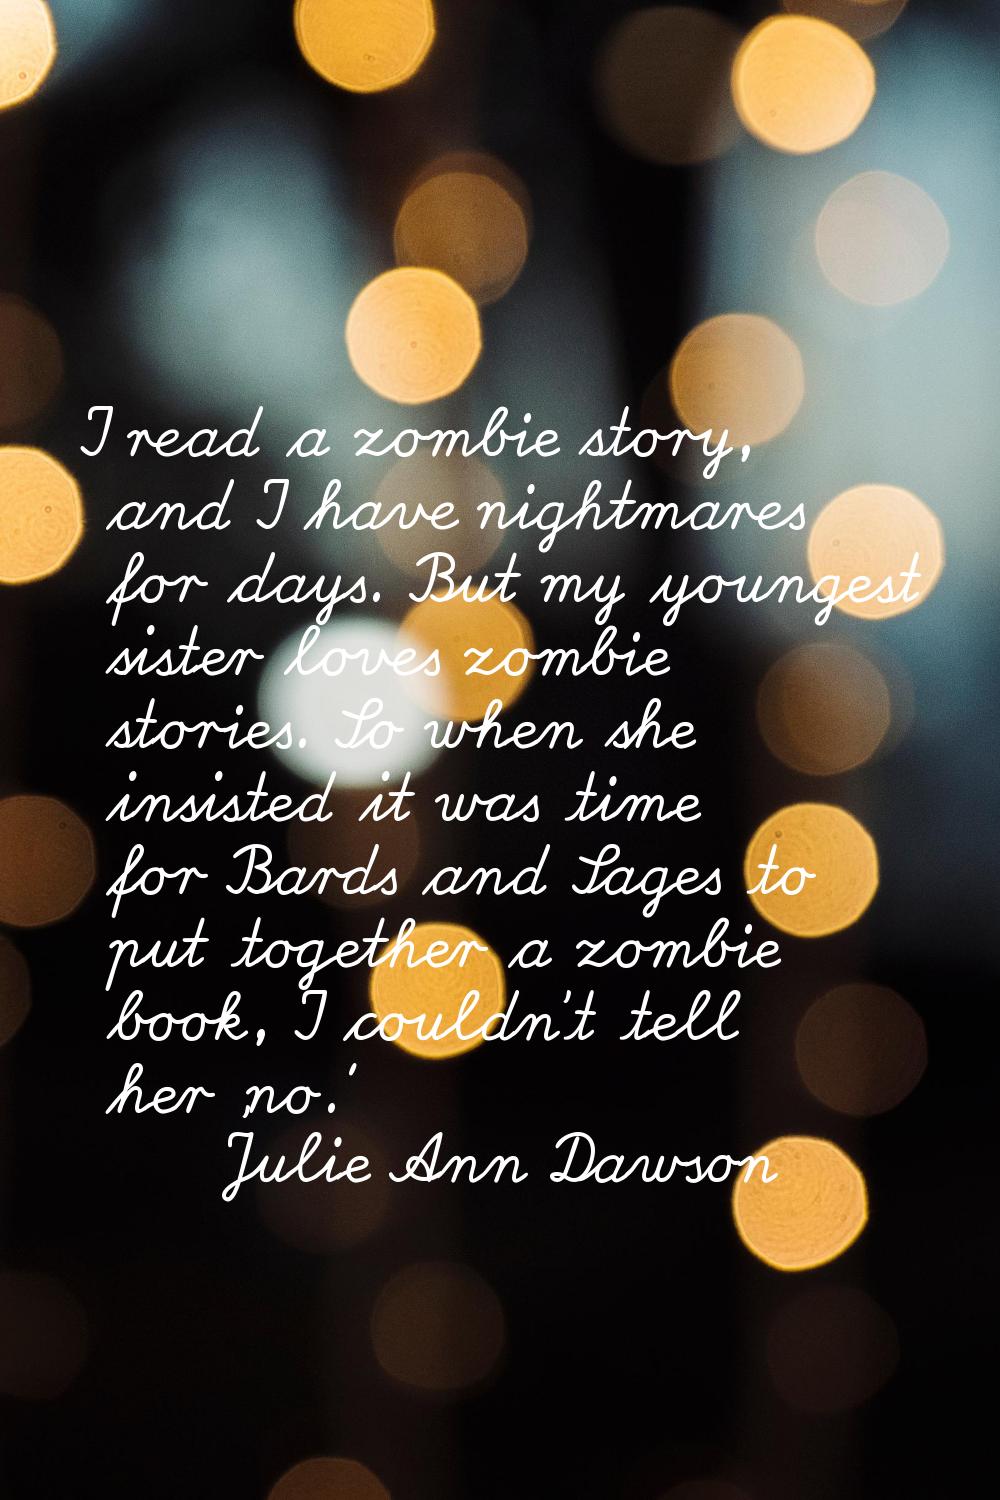 I read a zombie story, and I have nightmares for days. But my youngest sister loves zombie stories.